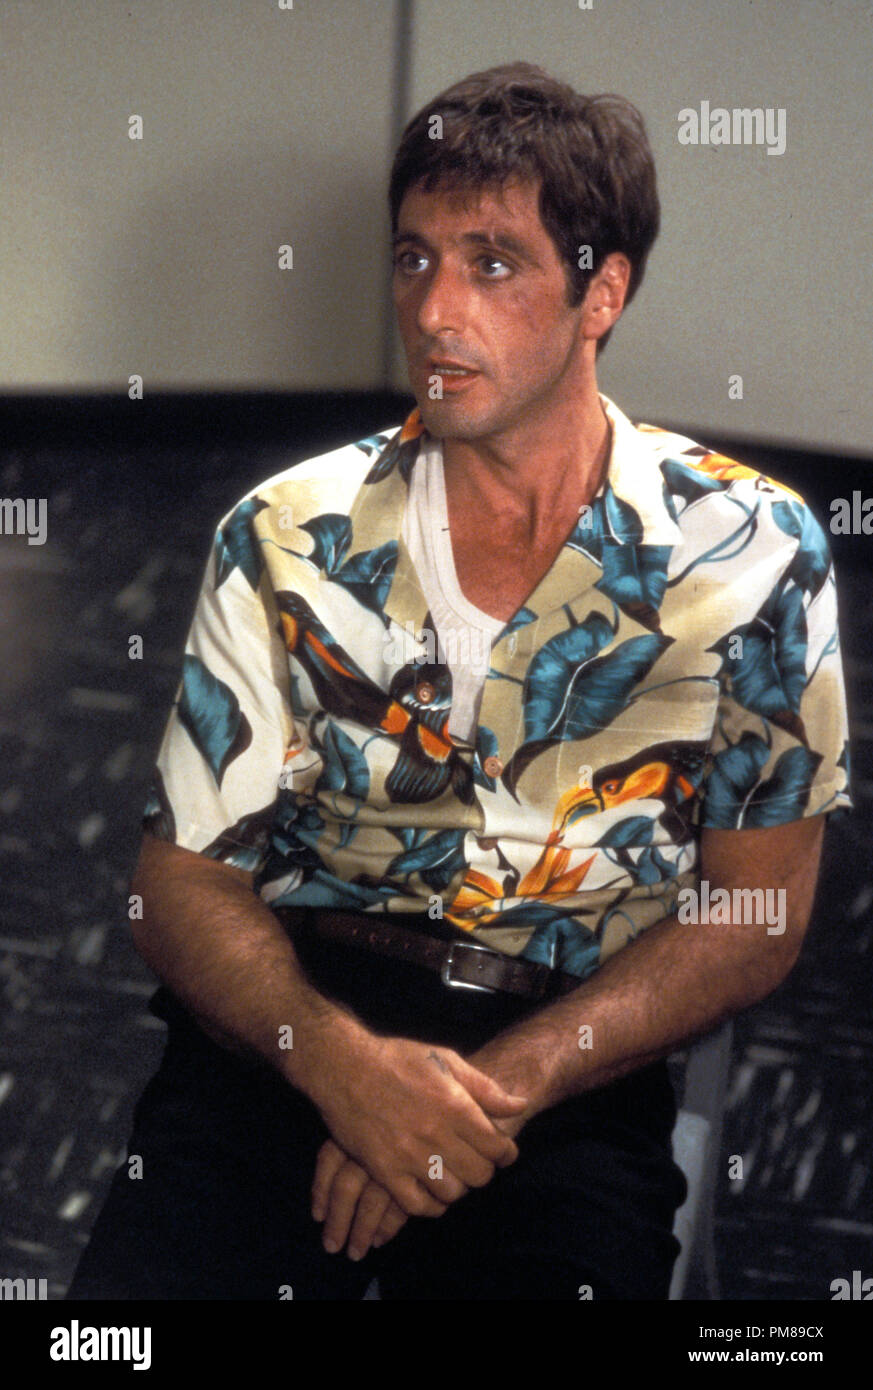 Studio Publicity Still from 'Scarface' Al Pacino © 1983 Universal  All Rights Reserved   File Reference # 31708105THA  For Editorial Use Only Stock Photo